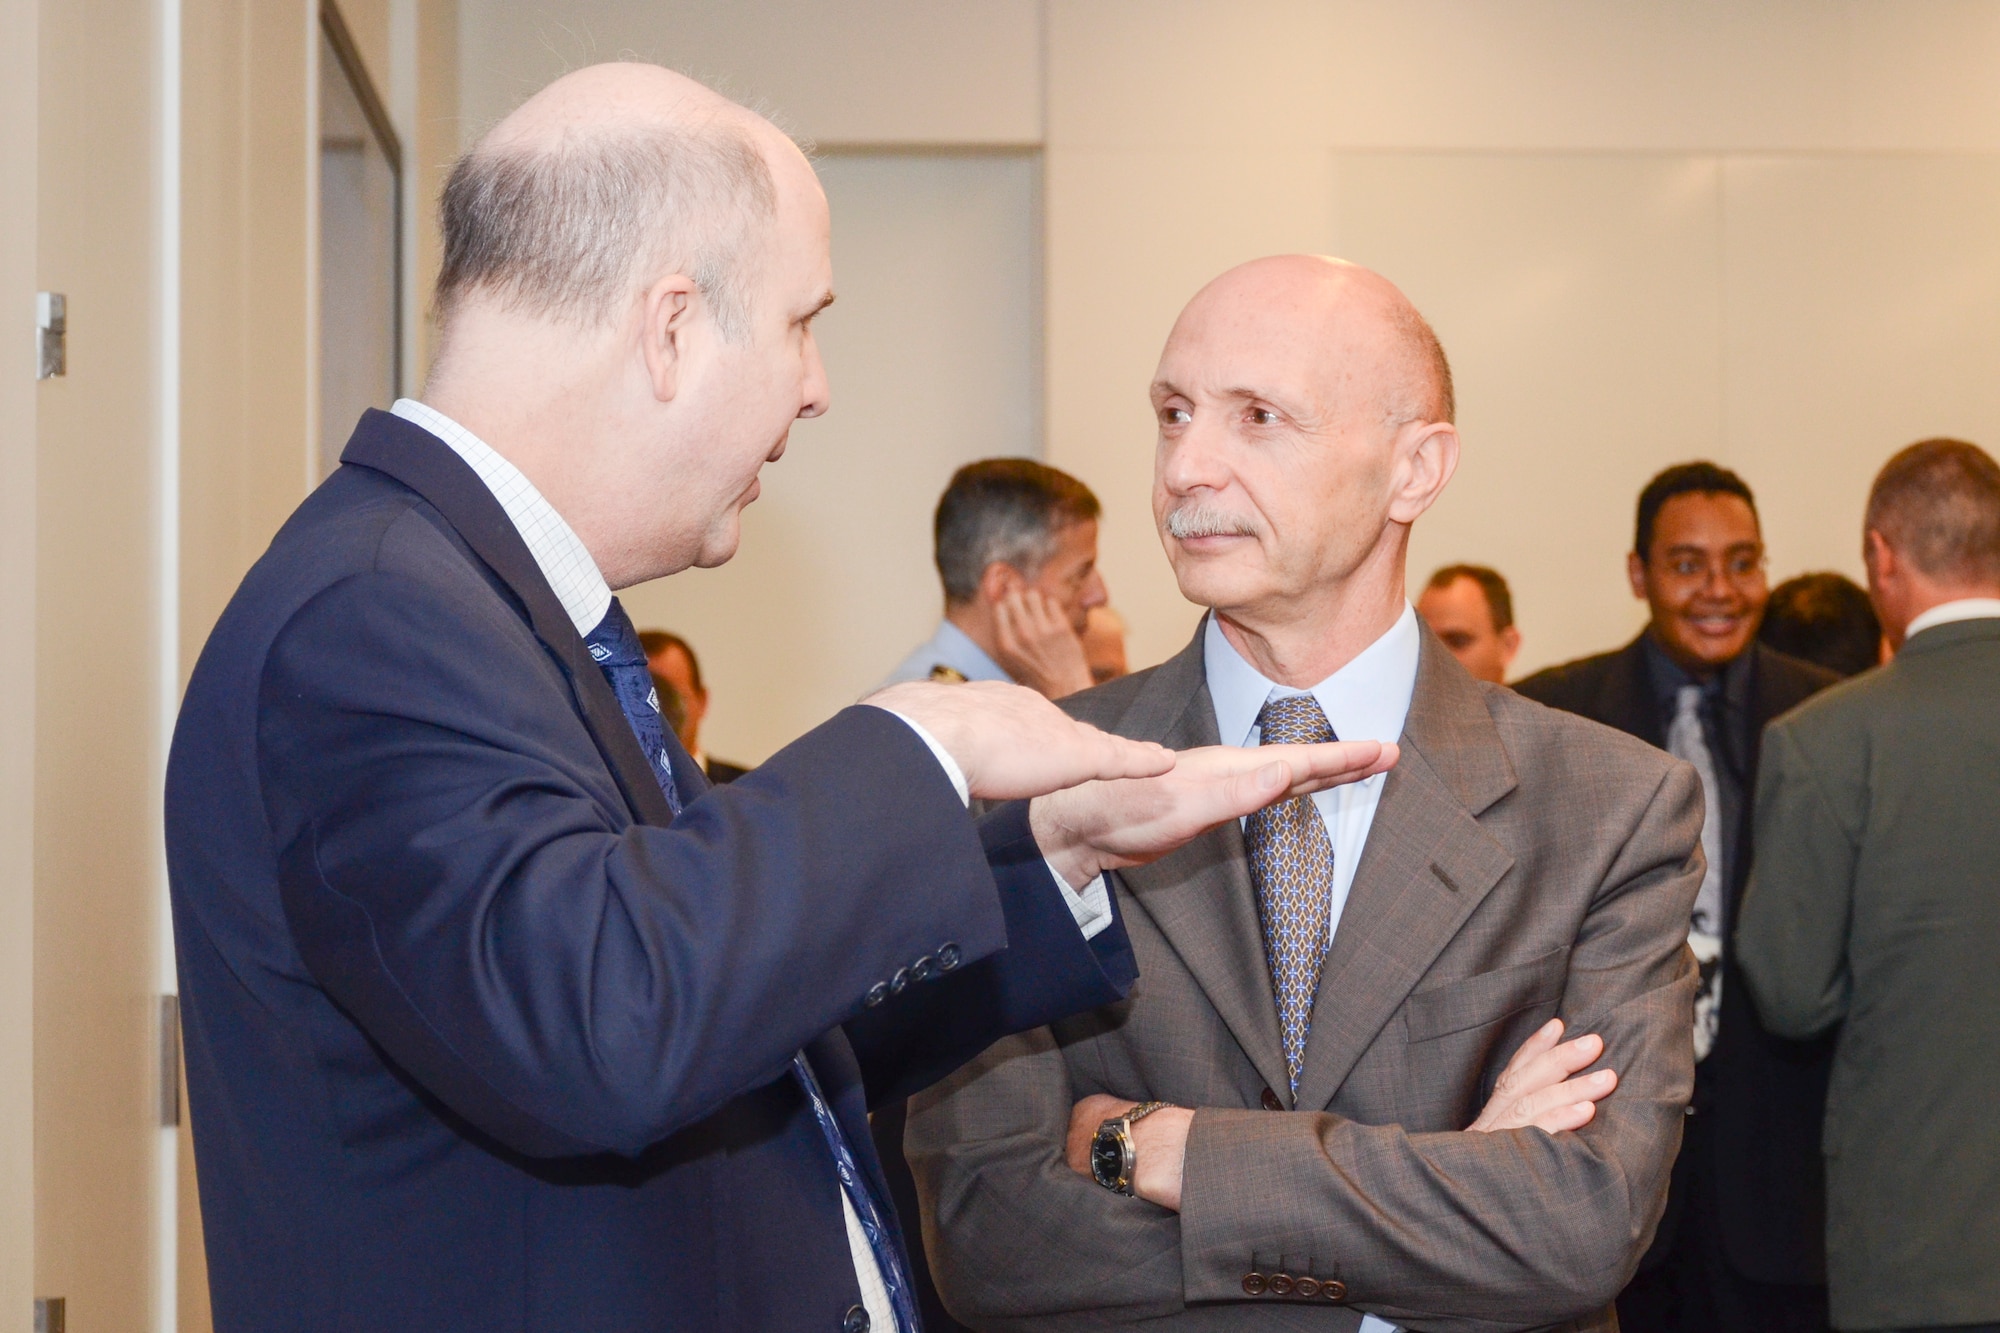 AFOSR Acting Director, Dr. Patrick Carrick conversing at the Air Force Office of Scientific Research (AFOSR) and the Embassy of Italy technical exchange meeting in held in Arlington, Va. 